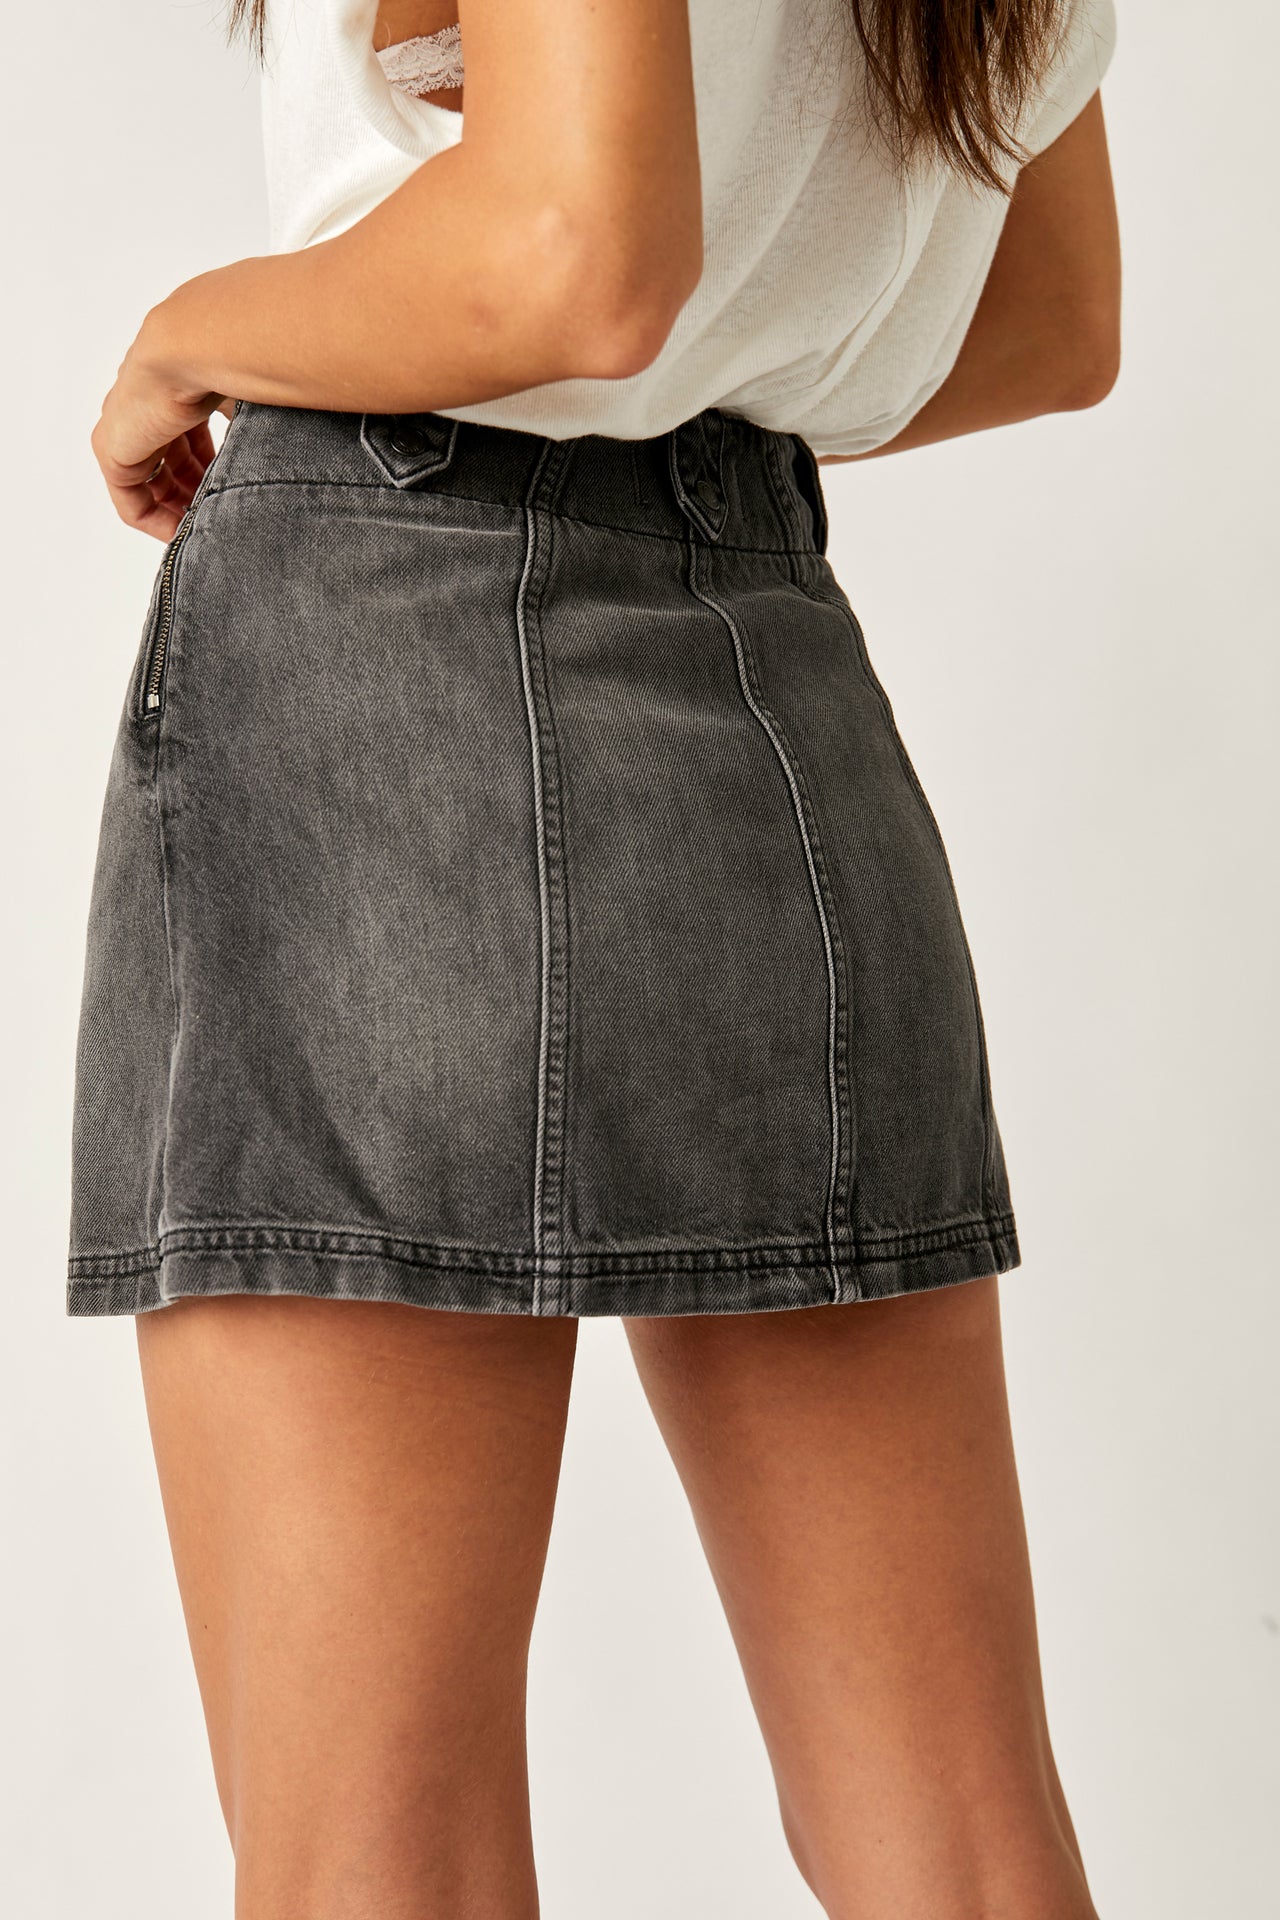 Runaway Denim Skirt Ashes to Ashes, Mini Skirt by Free People | LIT Boutique